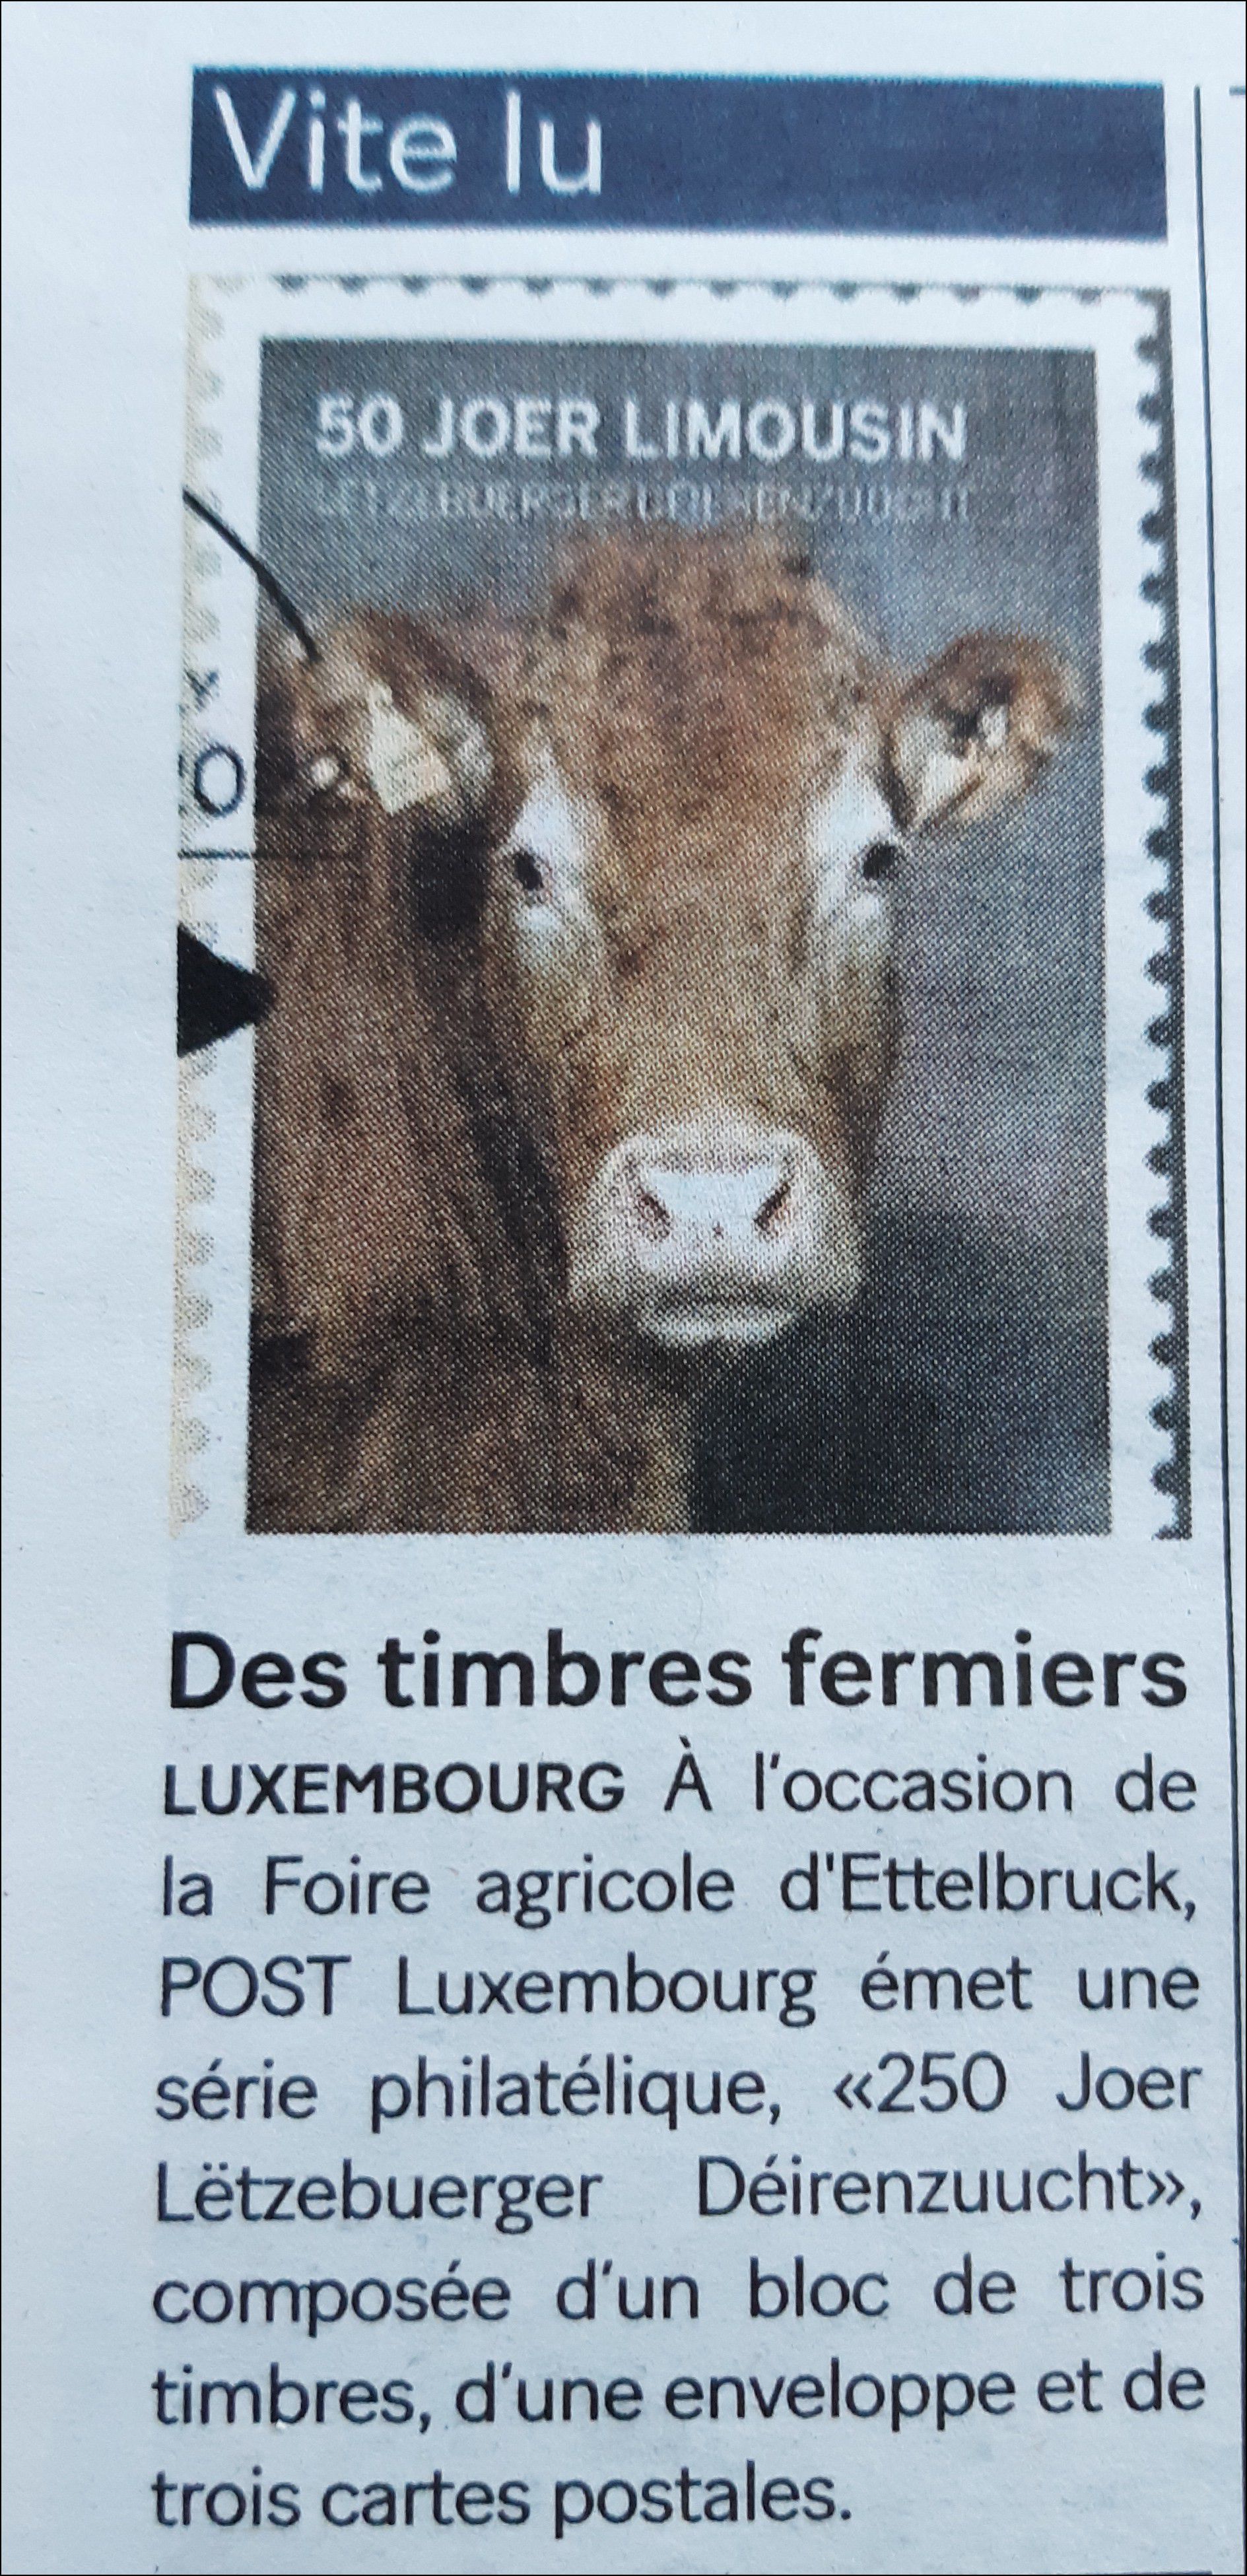 Timbres_fermiers.jpg